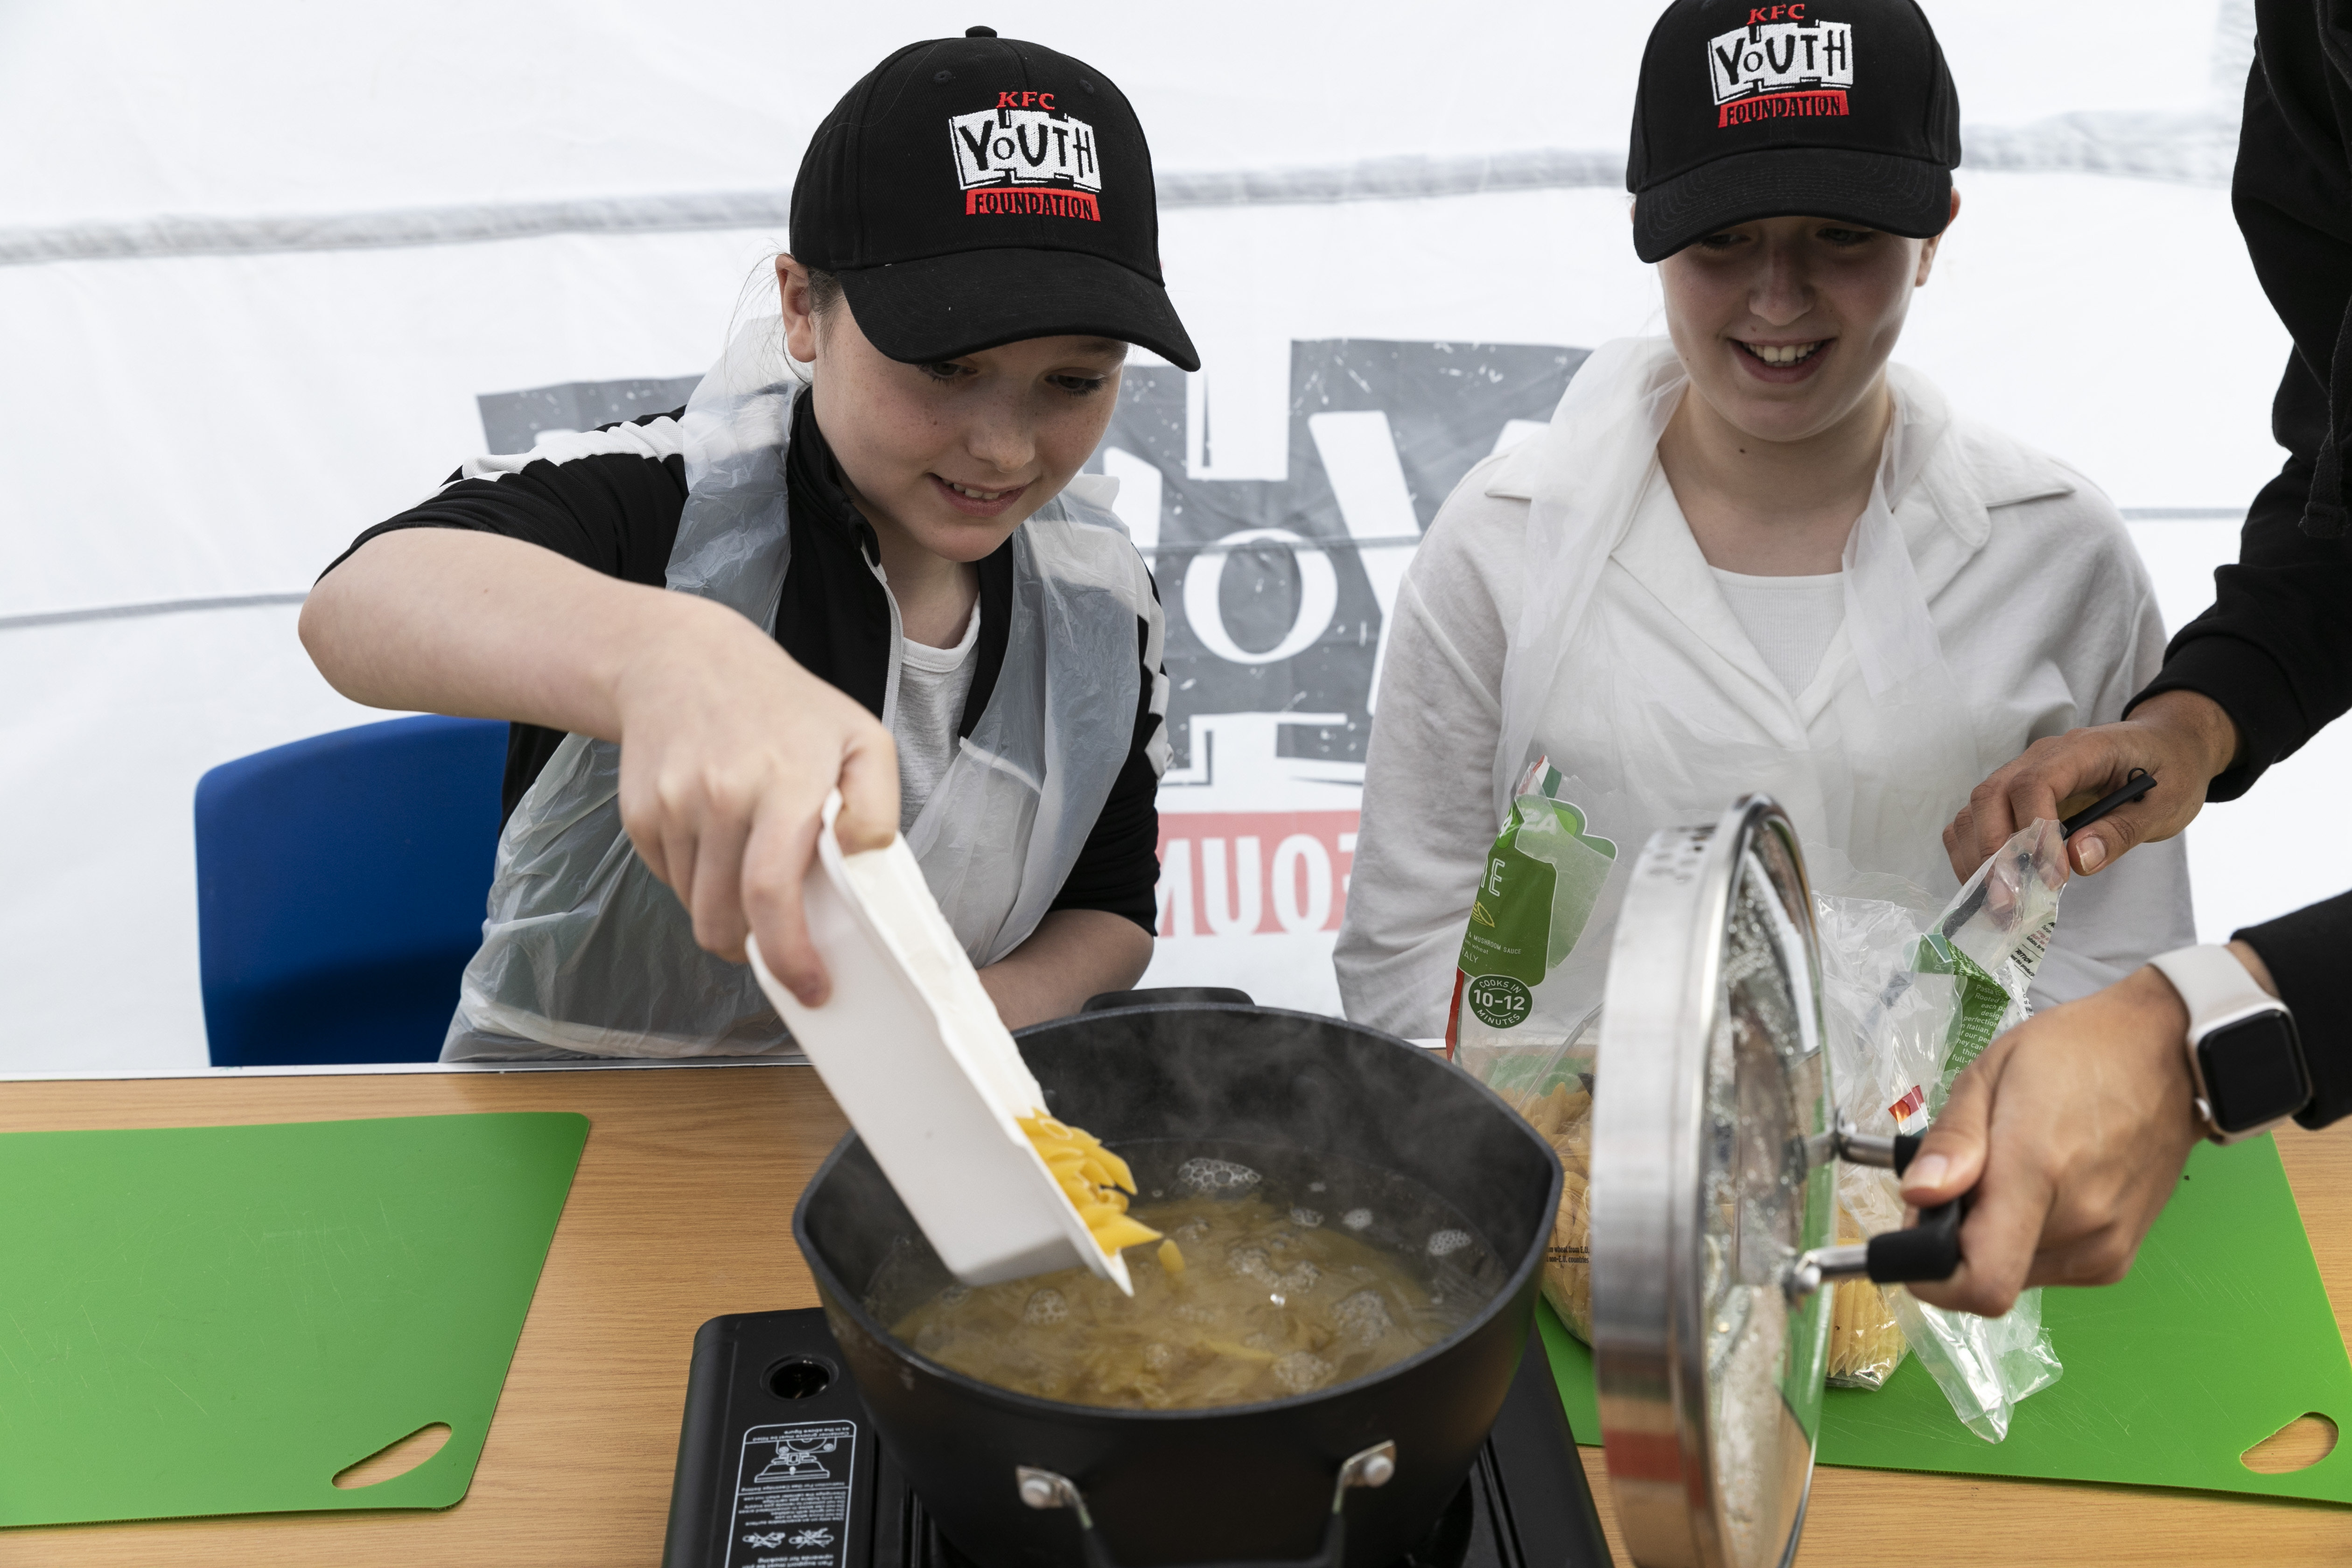 One girl pouring dry pasta into a pot with hot water, another girl watching on, both smiling. Another person off camera holding lid of pot. KFC Youth Foundation banner in the background